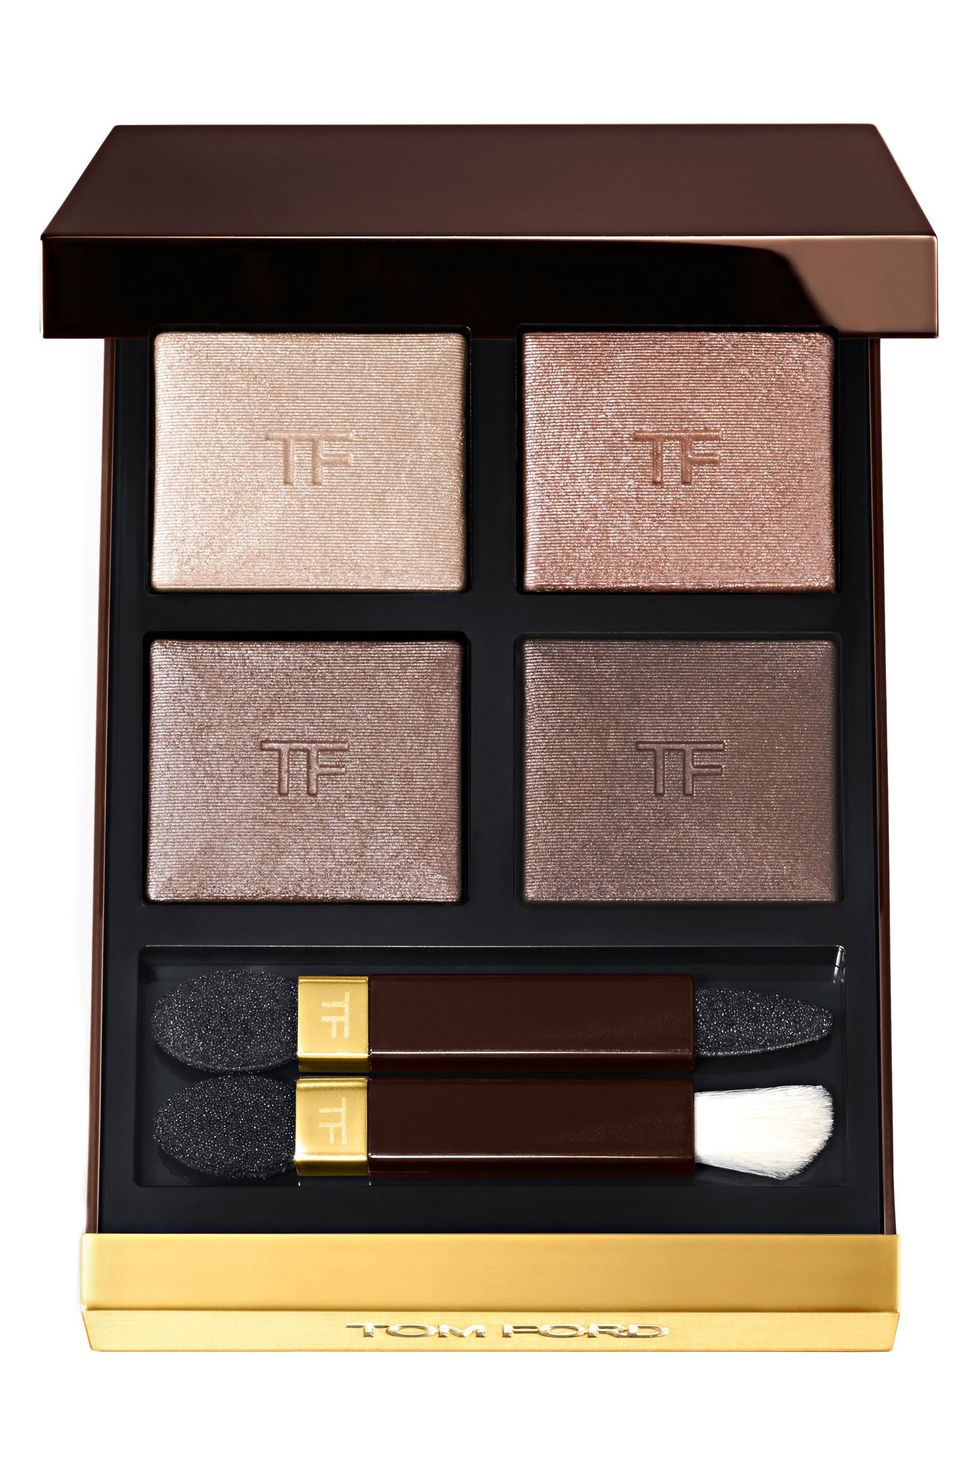 Tom Ford Eye Color Quad in Nude Dip